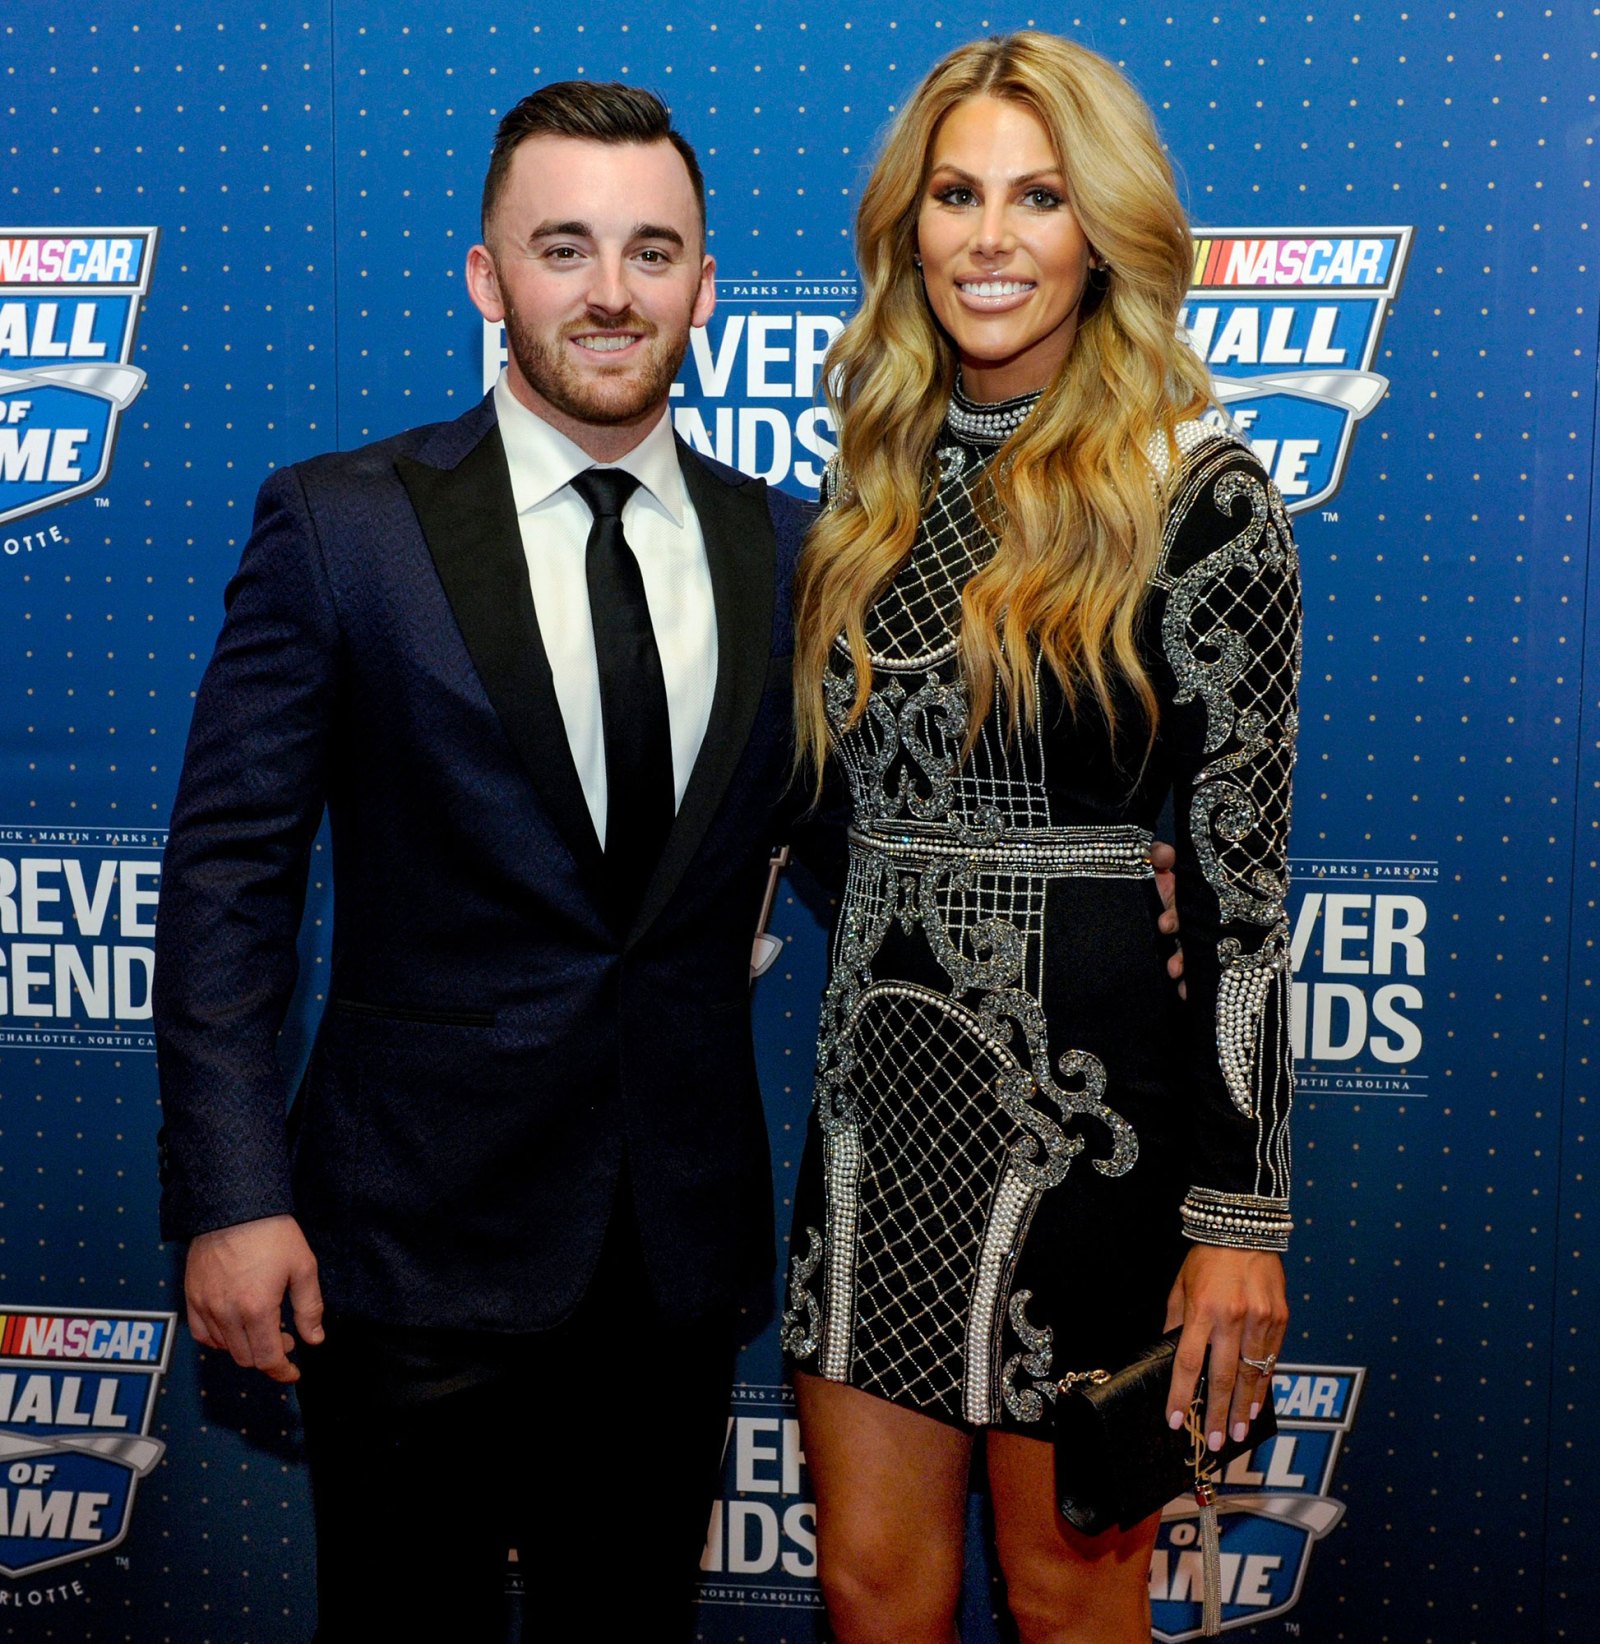 NASCAR Driver Austin Dillon and Wife Whitney Dillon’s Relationship Timeline Through the Years